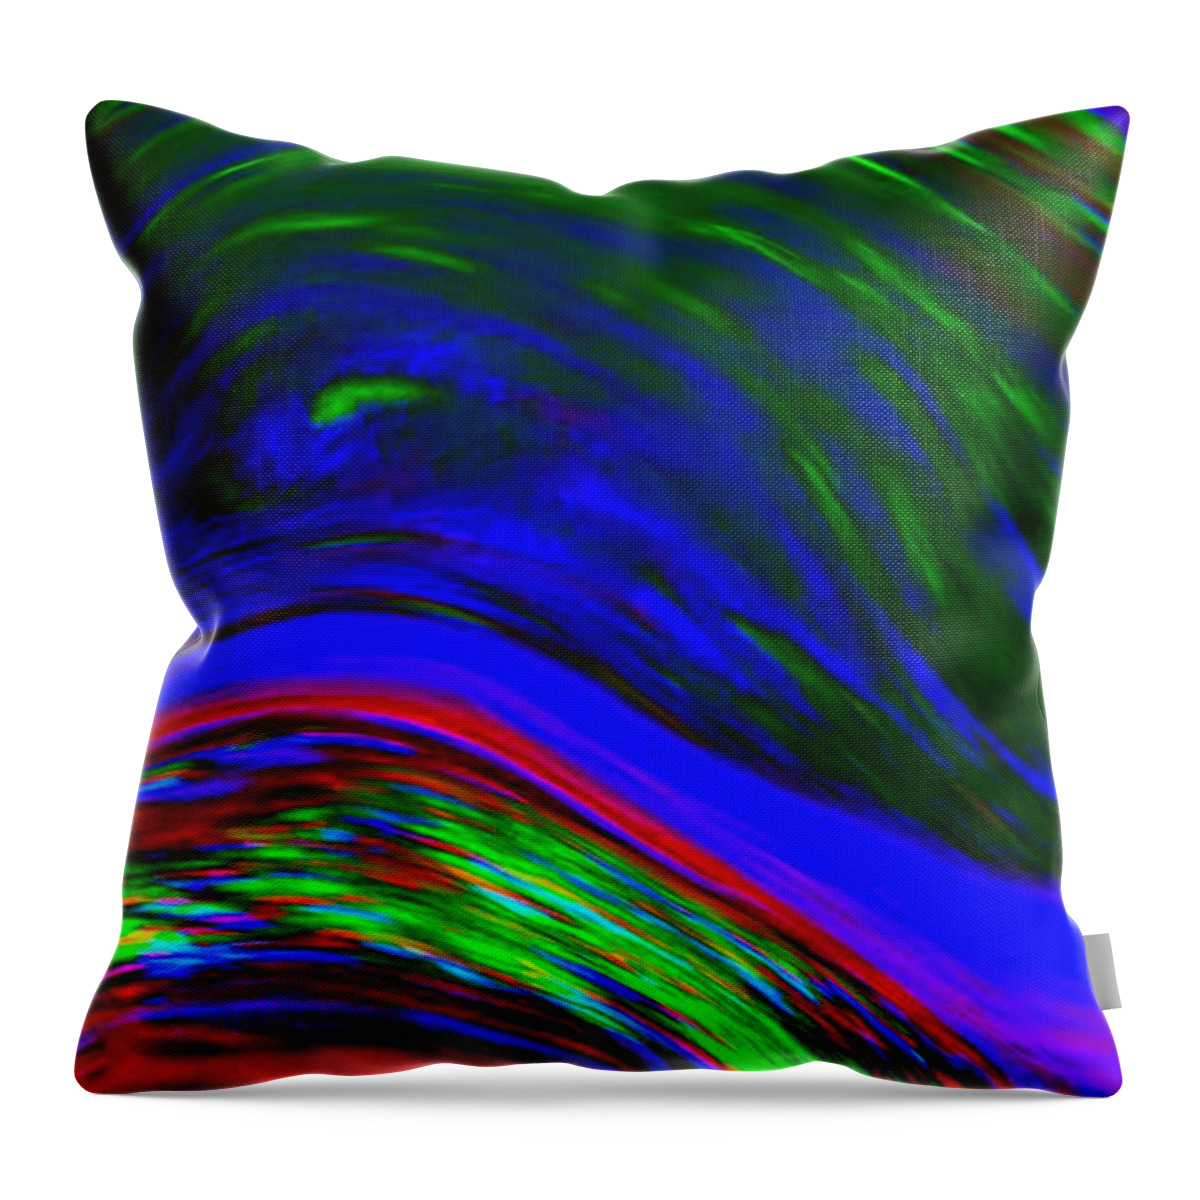 Emotional Throw Pillow featuring the digital art The Anguish by Glenn Hernandez